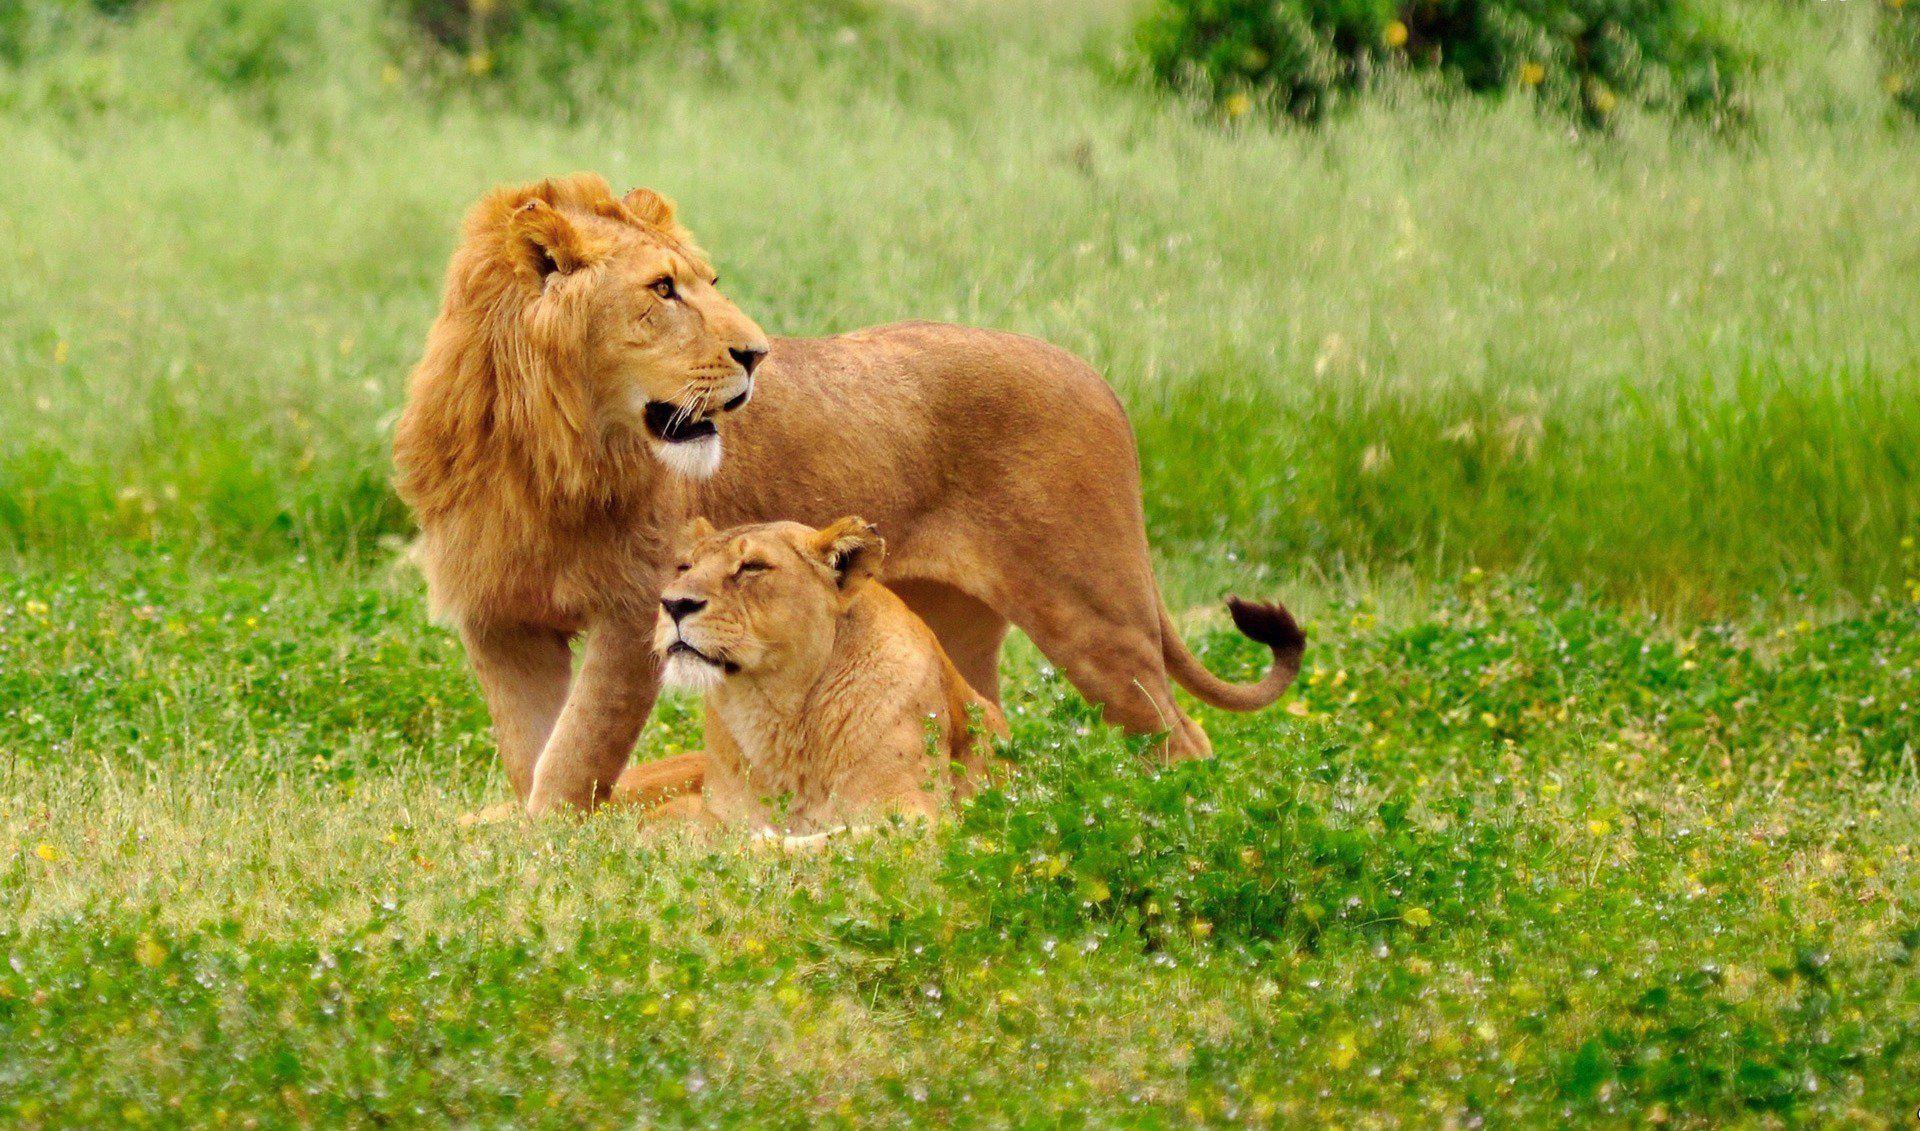 Lion Couple Quotes also Sorted inside Animals category, was Attacted